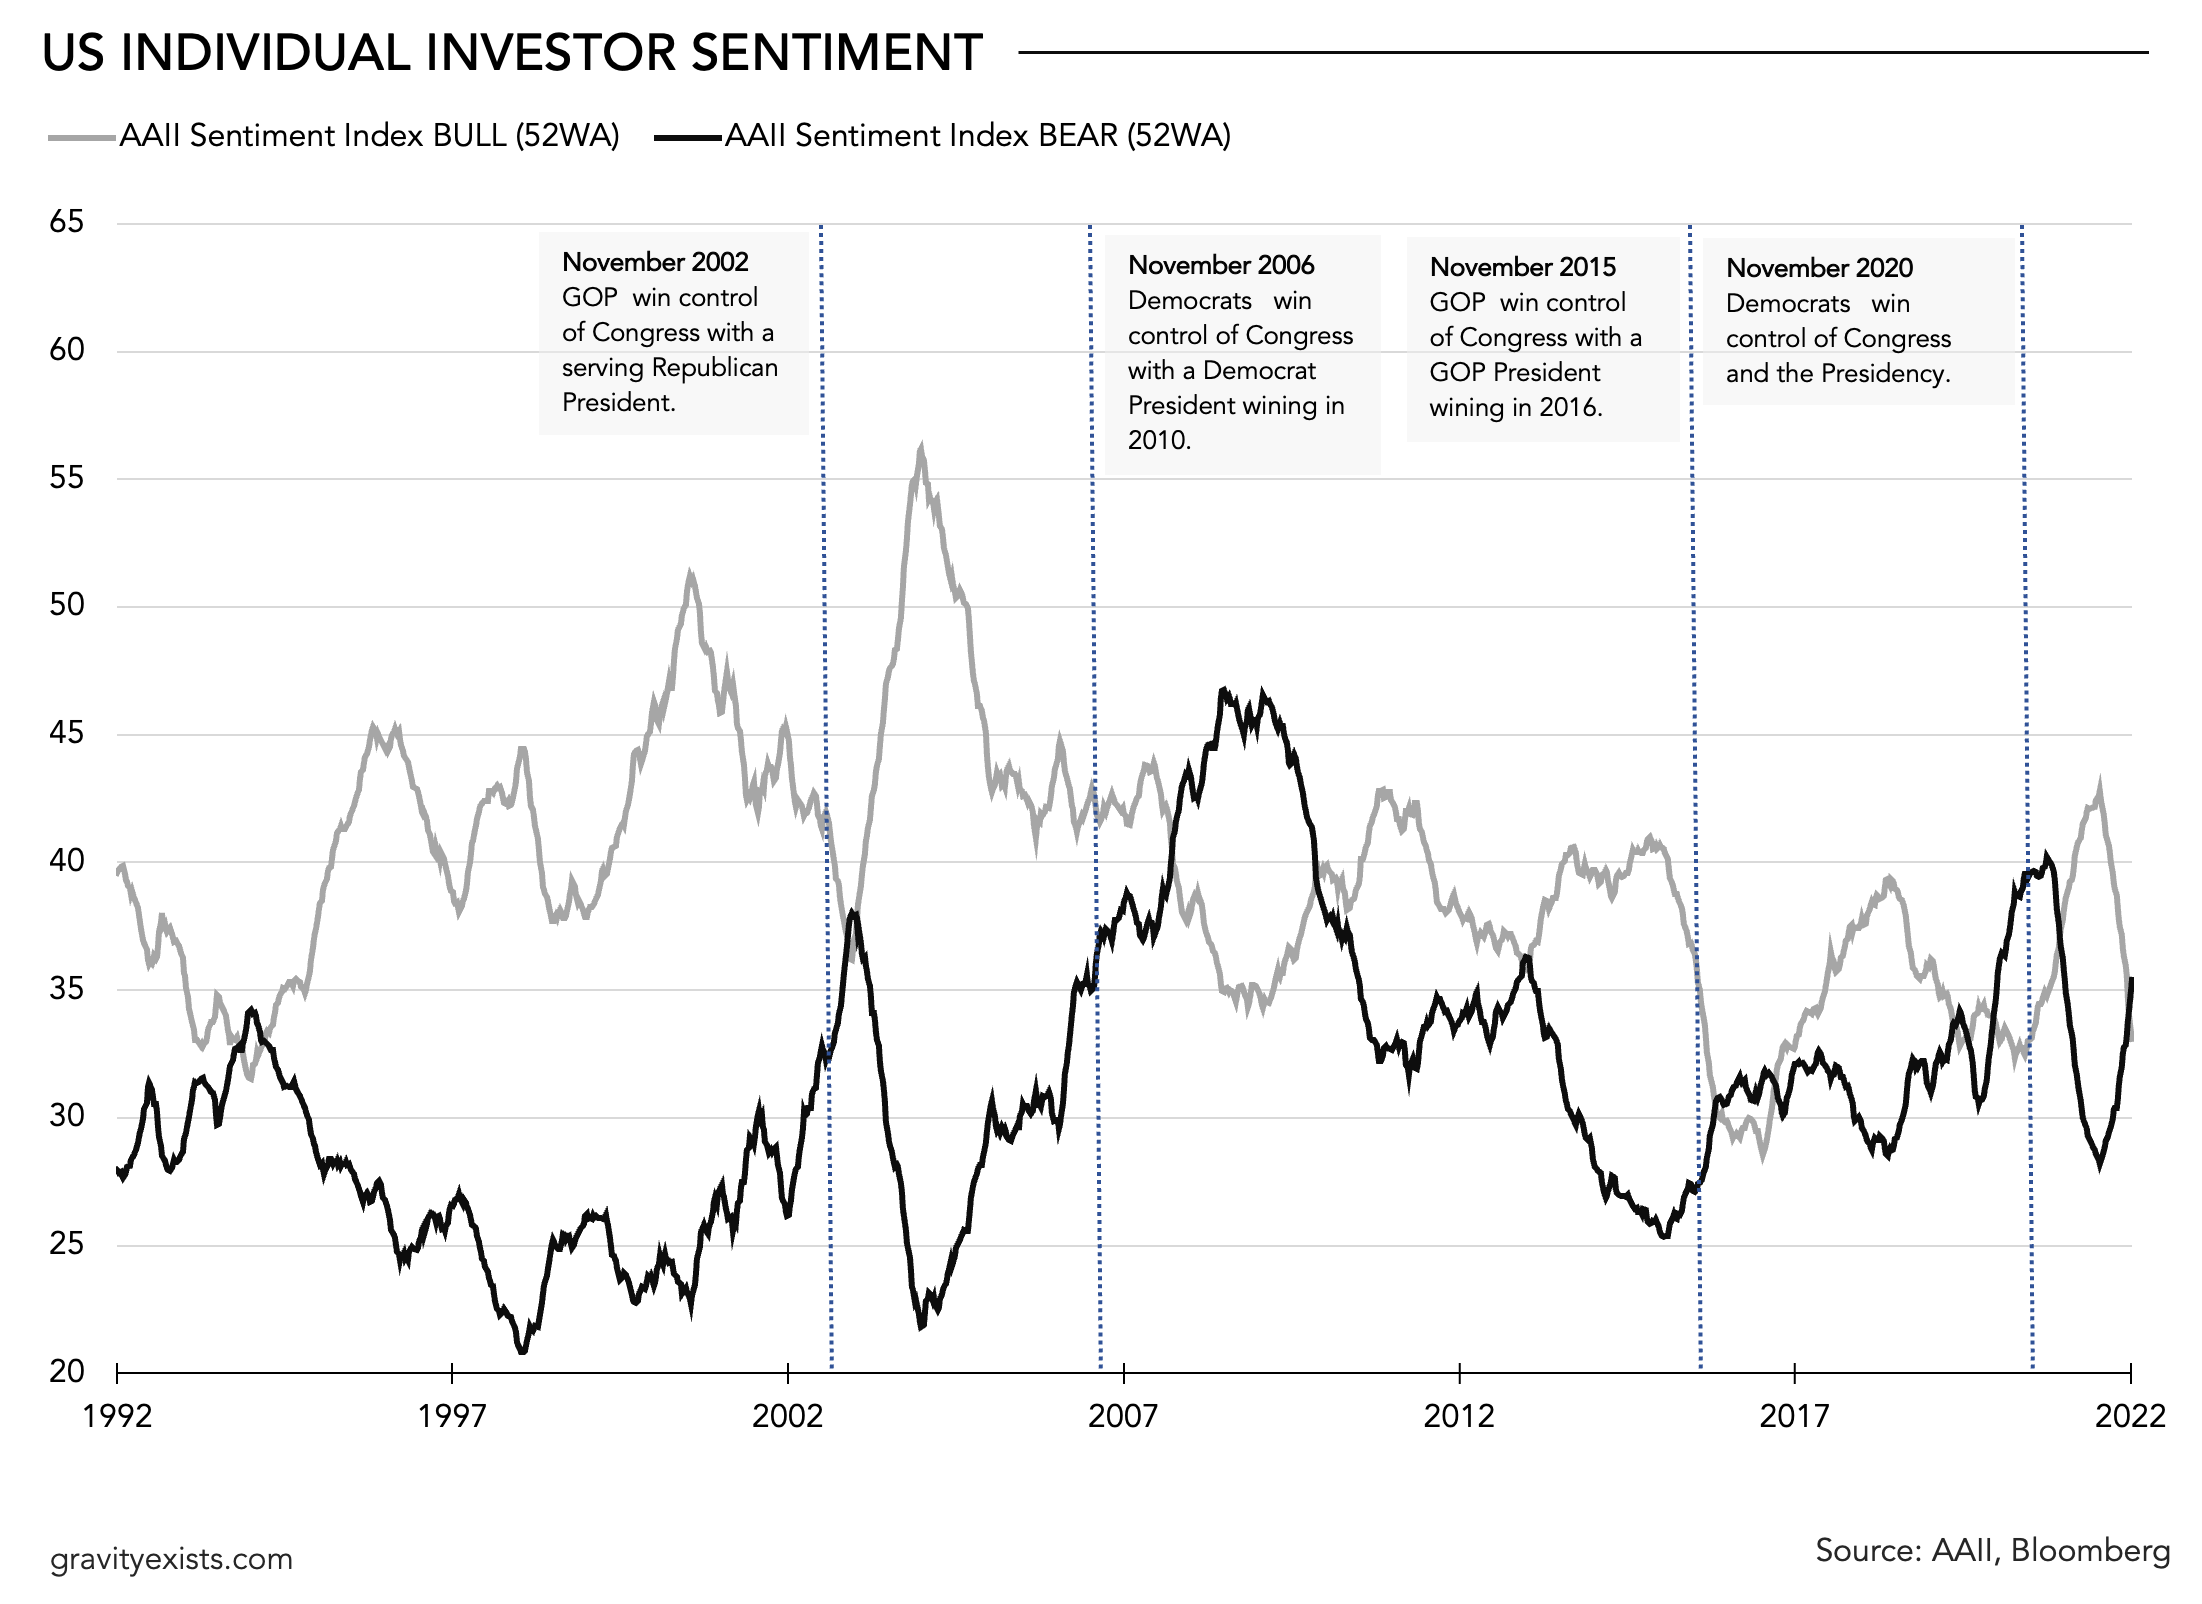 The mood of US individual investors has exhibited a bearish trend during periods that a single party won a mandates for a unified government.